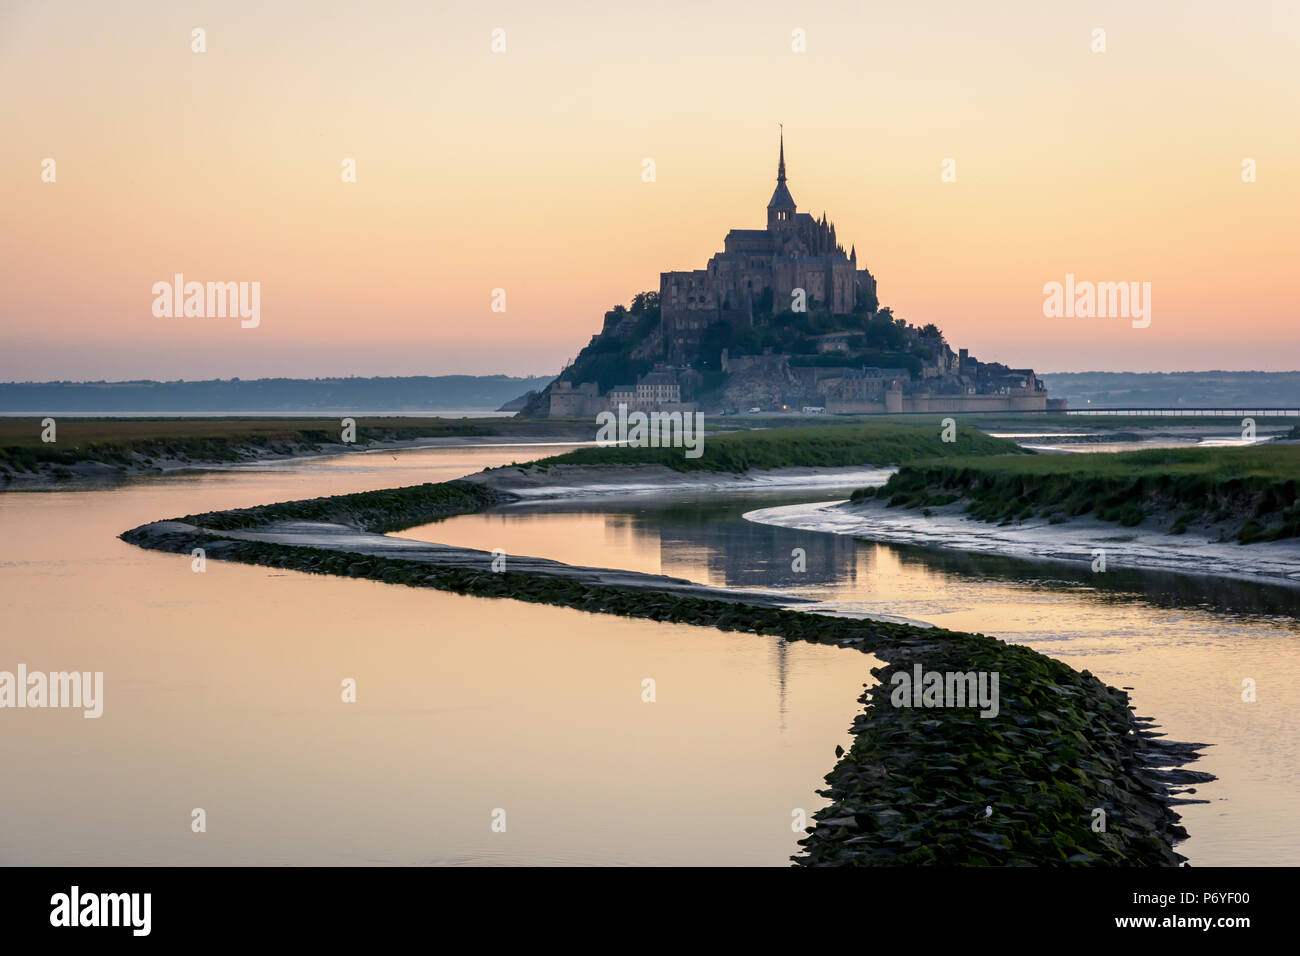 The Mont Saint-Michel island in Normandy, France, at sunrise and high tide with the warm colors of the sky reflecting in the waters of the Couesnon. Stock Photo